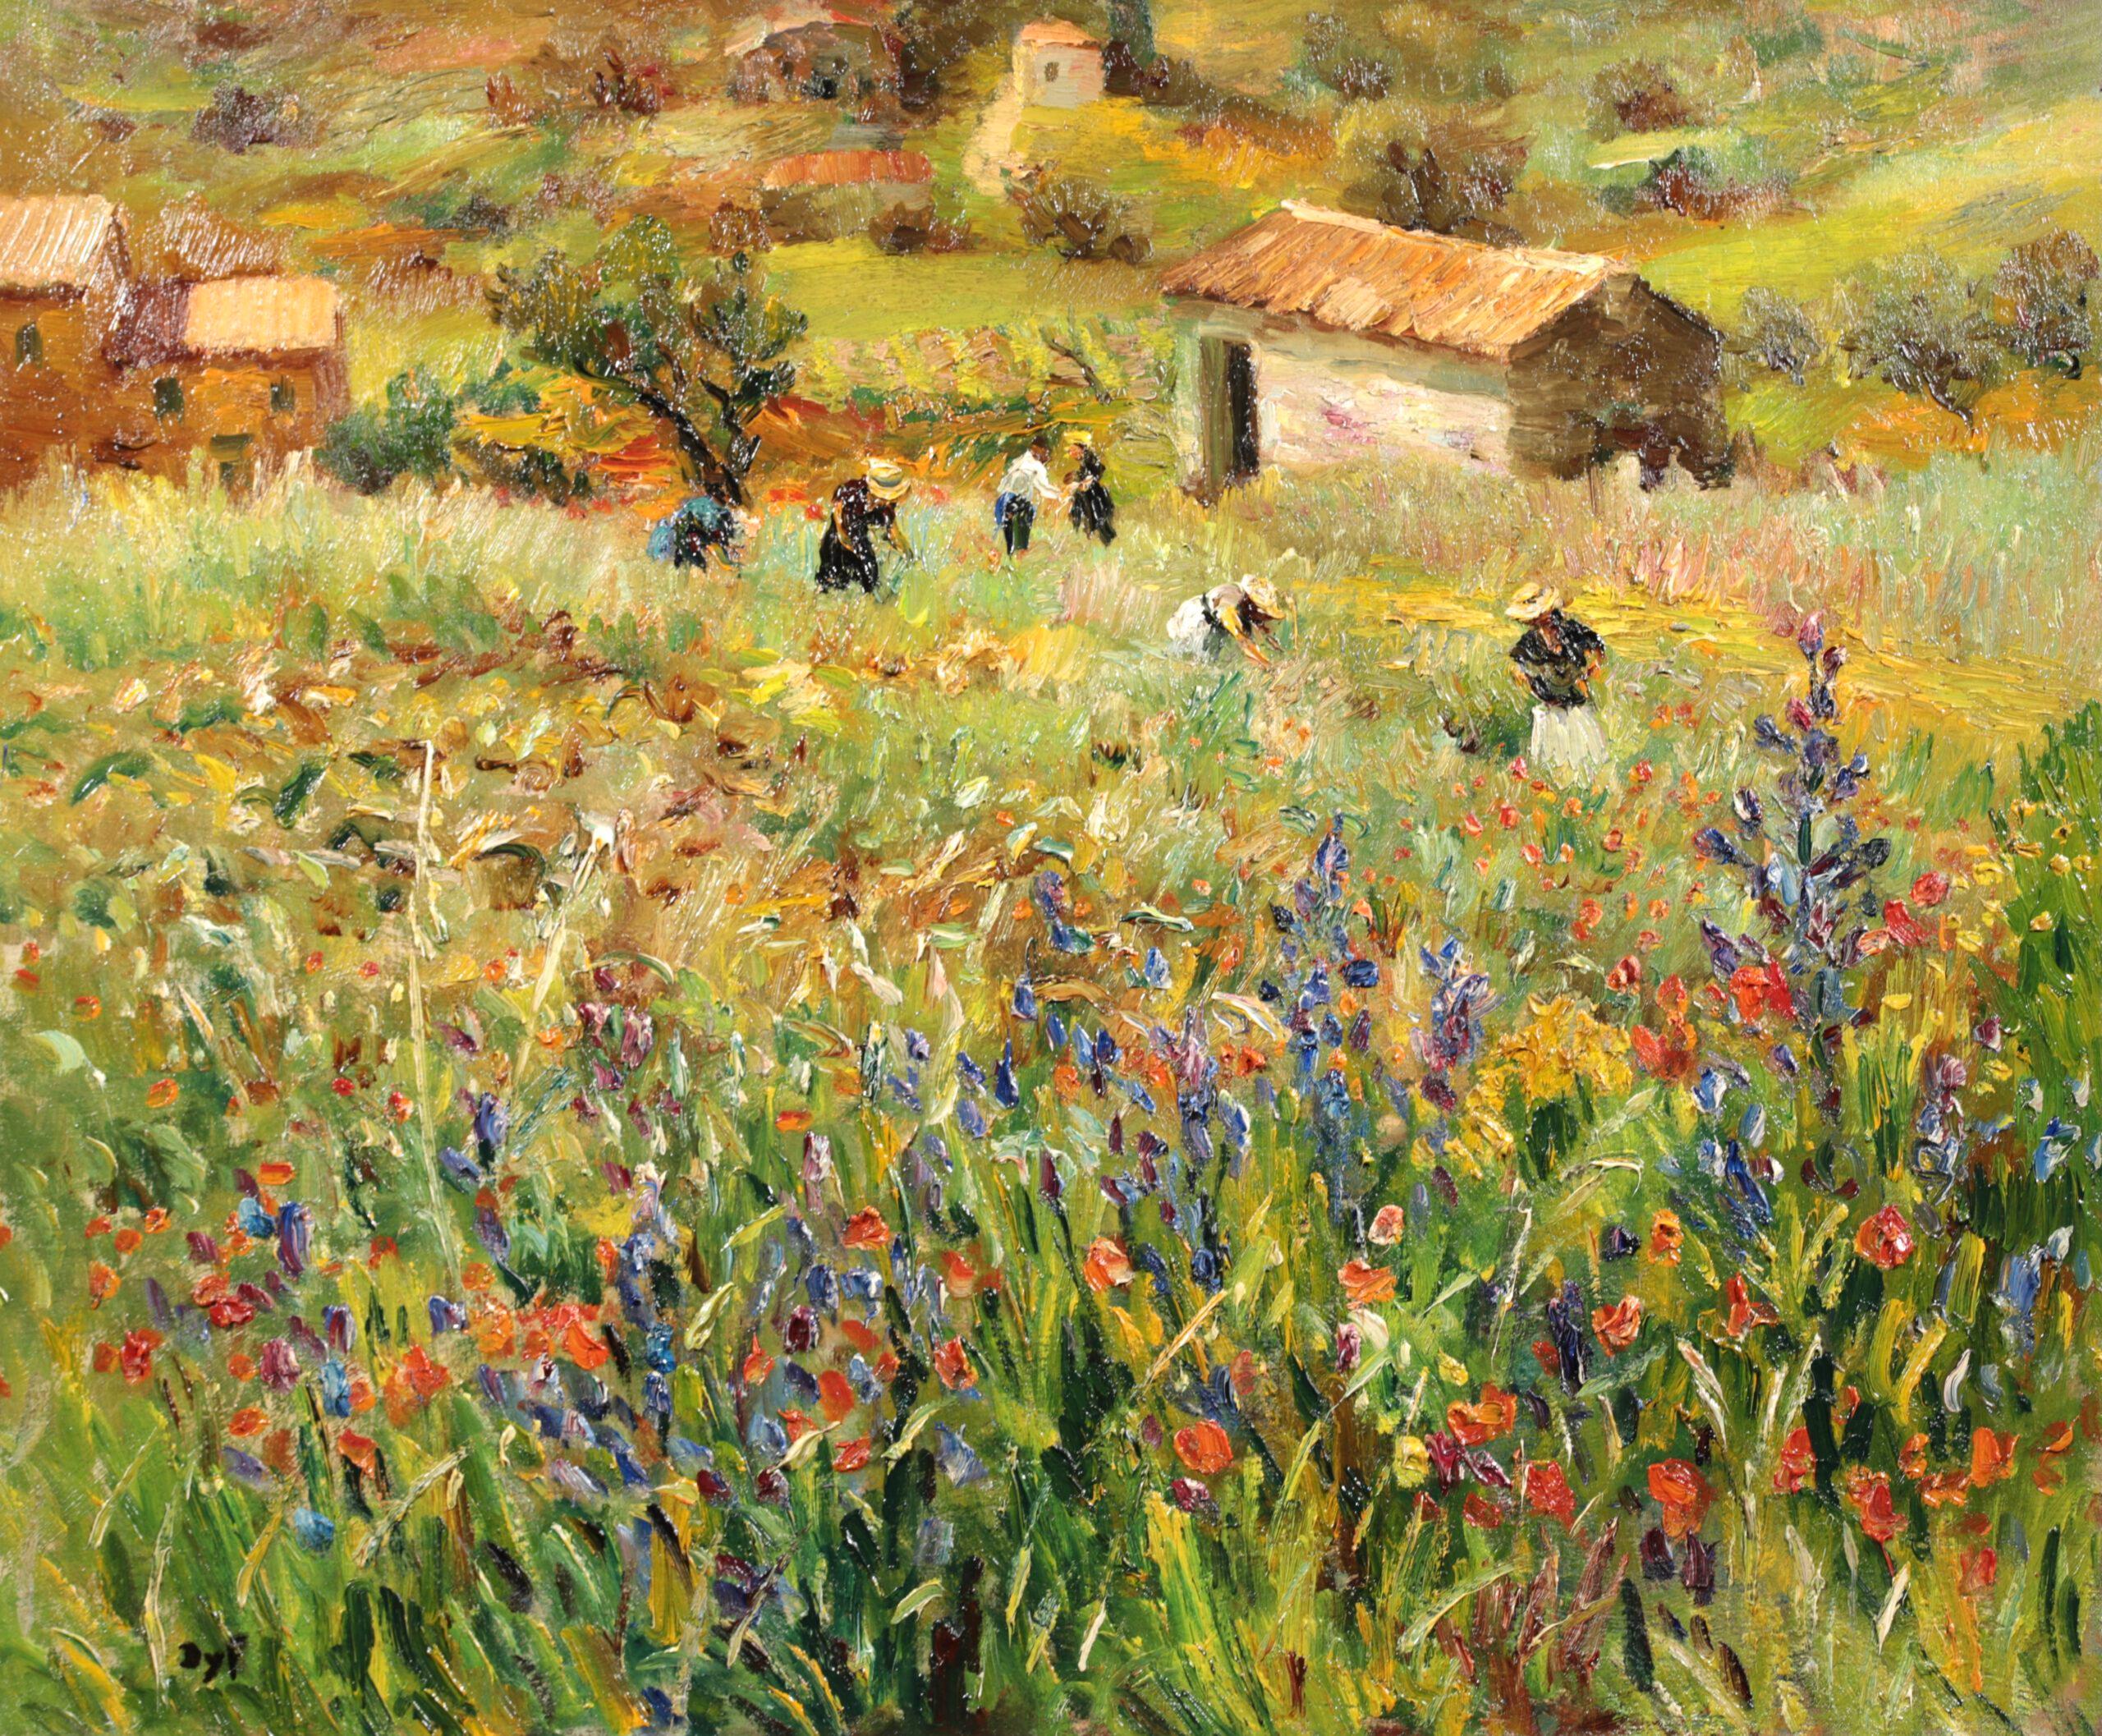 Signed oil on canvas figures in landscape by sought after French post impressionist painter Marcel Dyf. The work depicts workers picking flowers in a poppy field in St Paul de Vence, a medieval town on the French Riviera. 

Madame Claudine Dyf